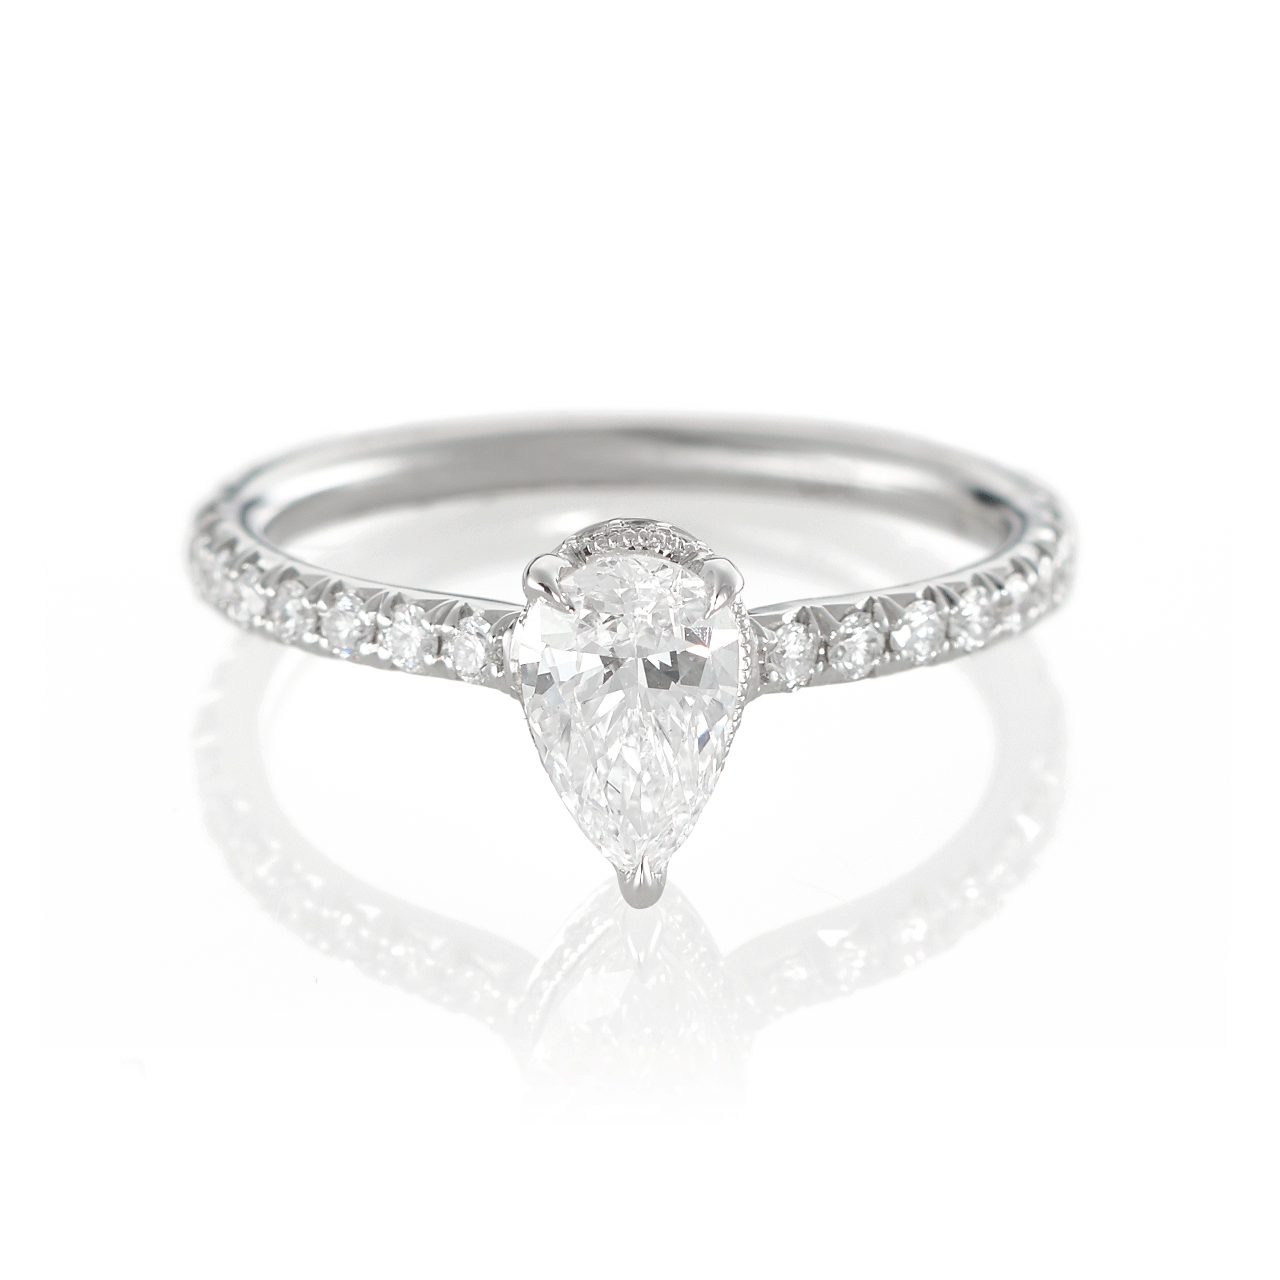 18K White Gold And .68 Carat Pear Shape Diamond Engagement Ring